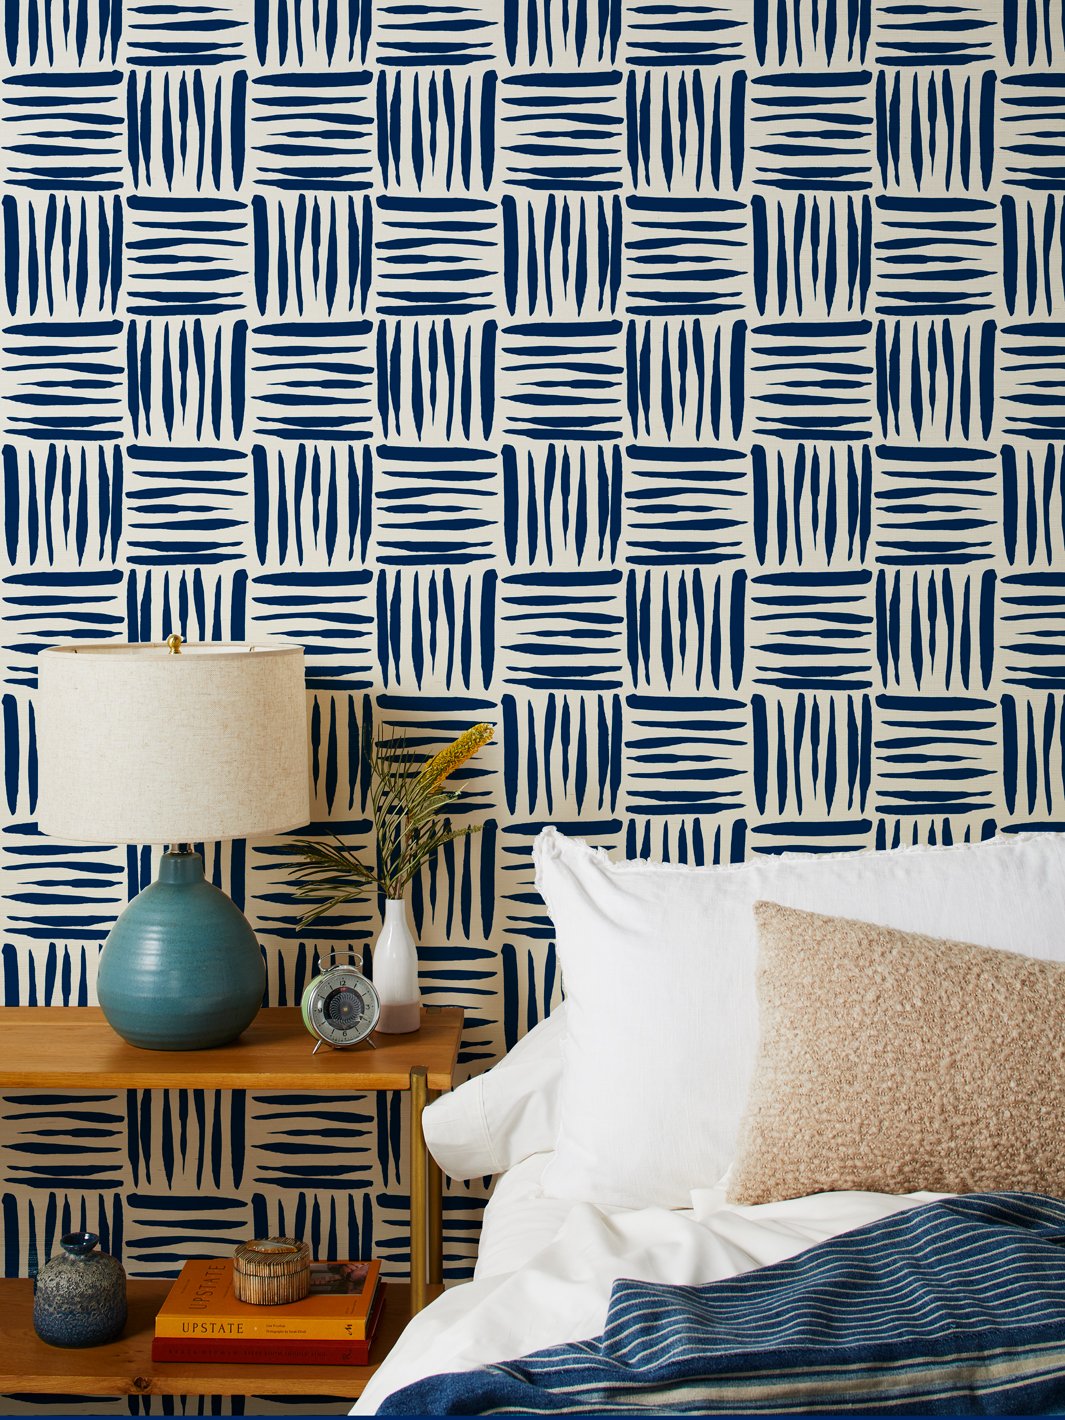 'Watercolor Weave Small' Grasscloth' Wallpaper by Wallshoppe - Solid Navy